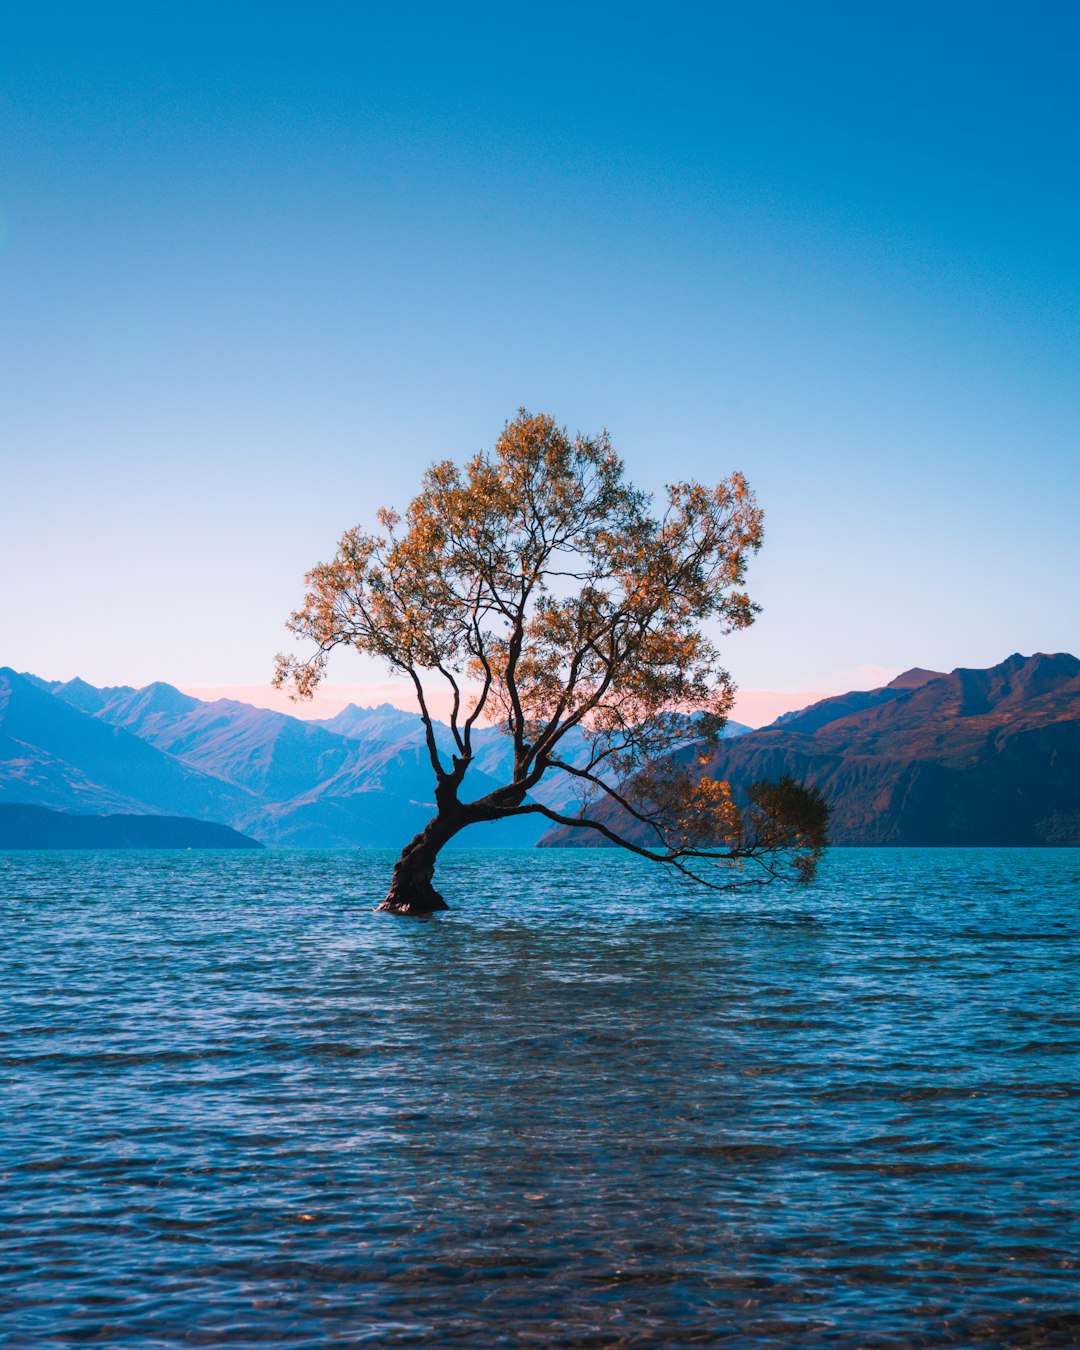 Travel Tips and Stories of Wanaka in New Zealand